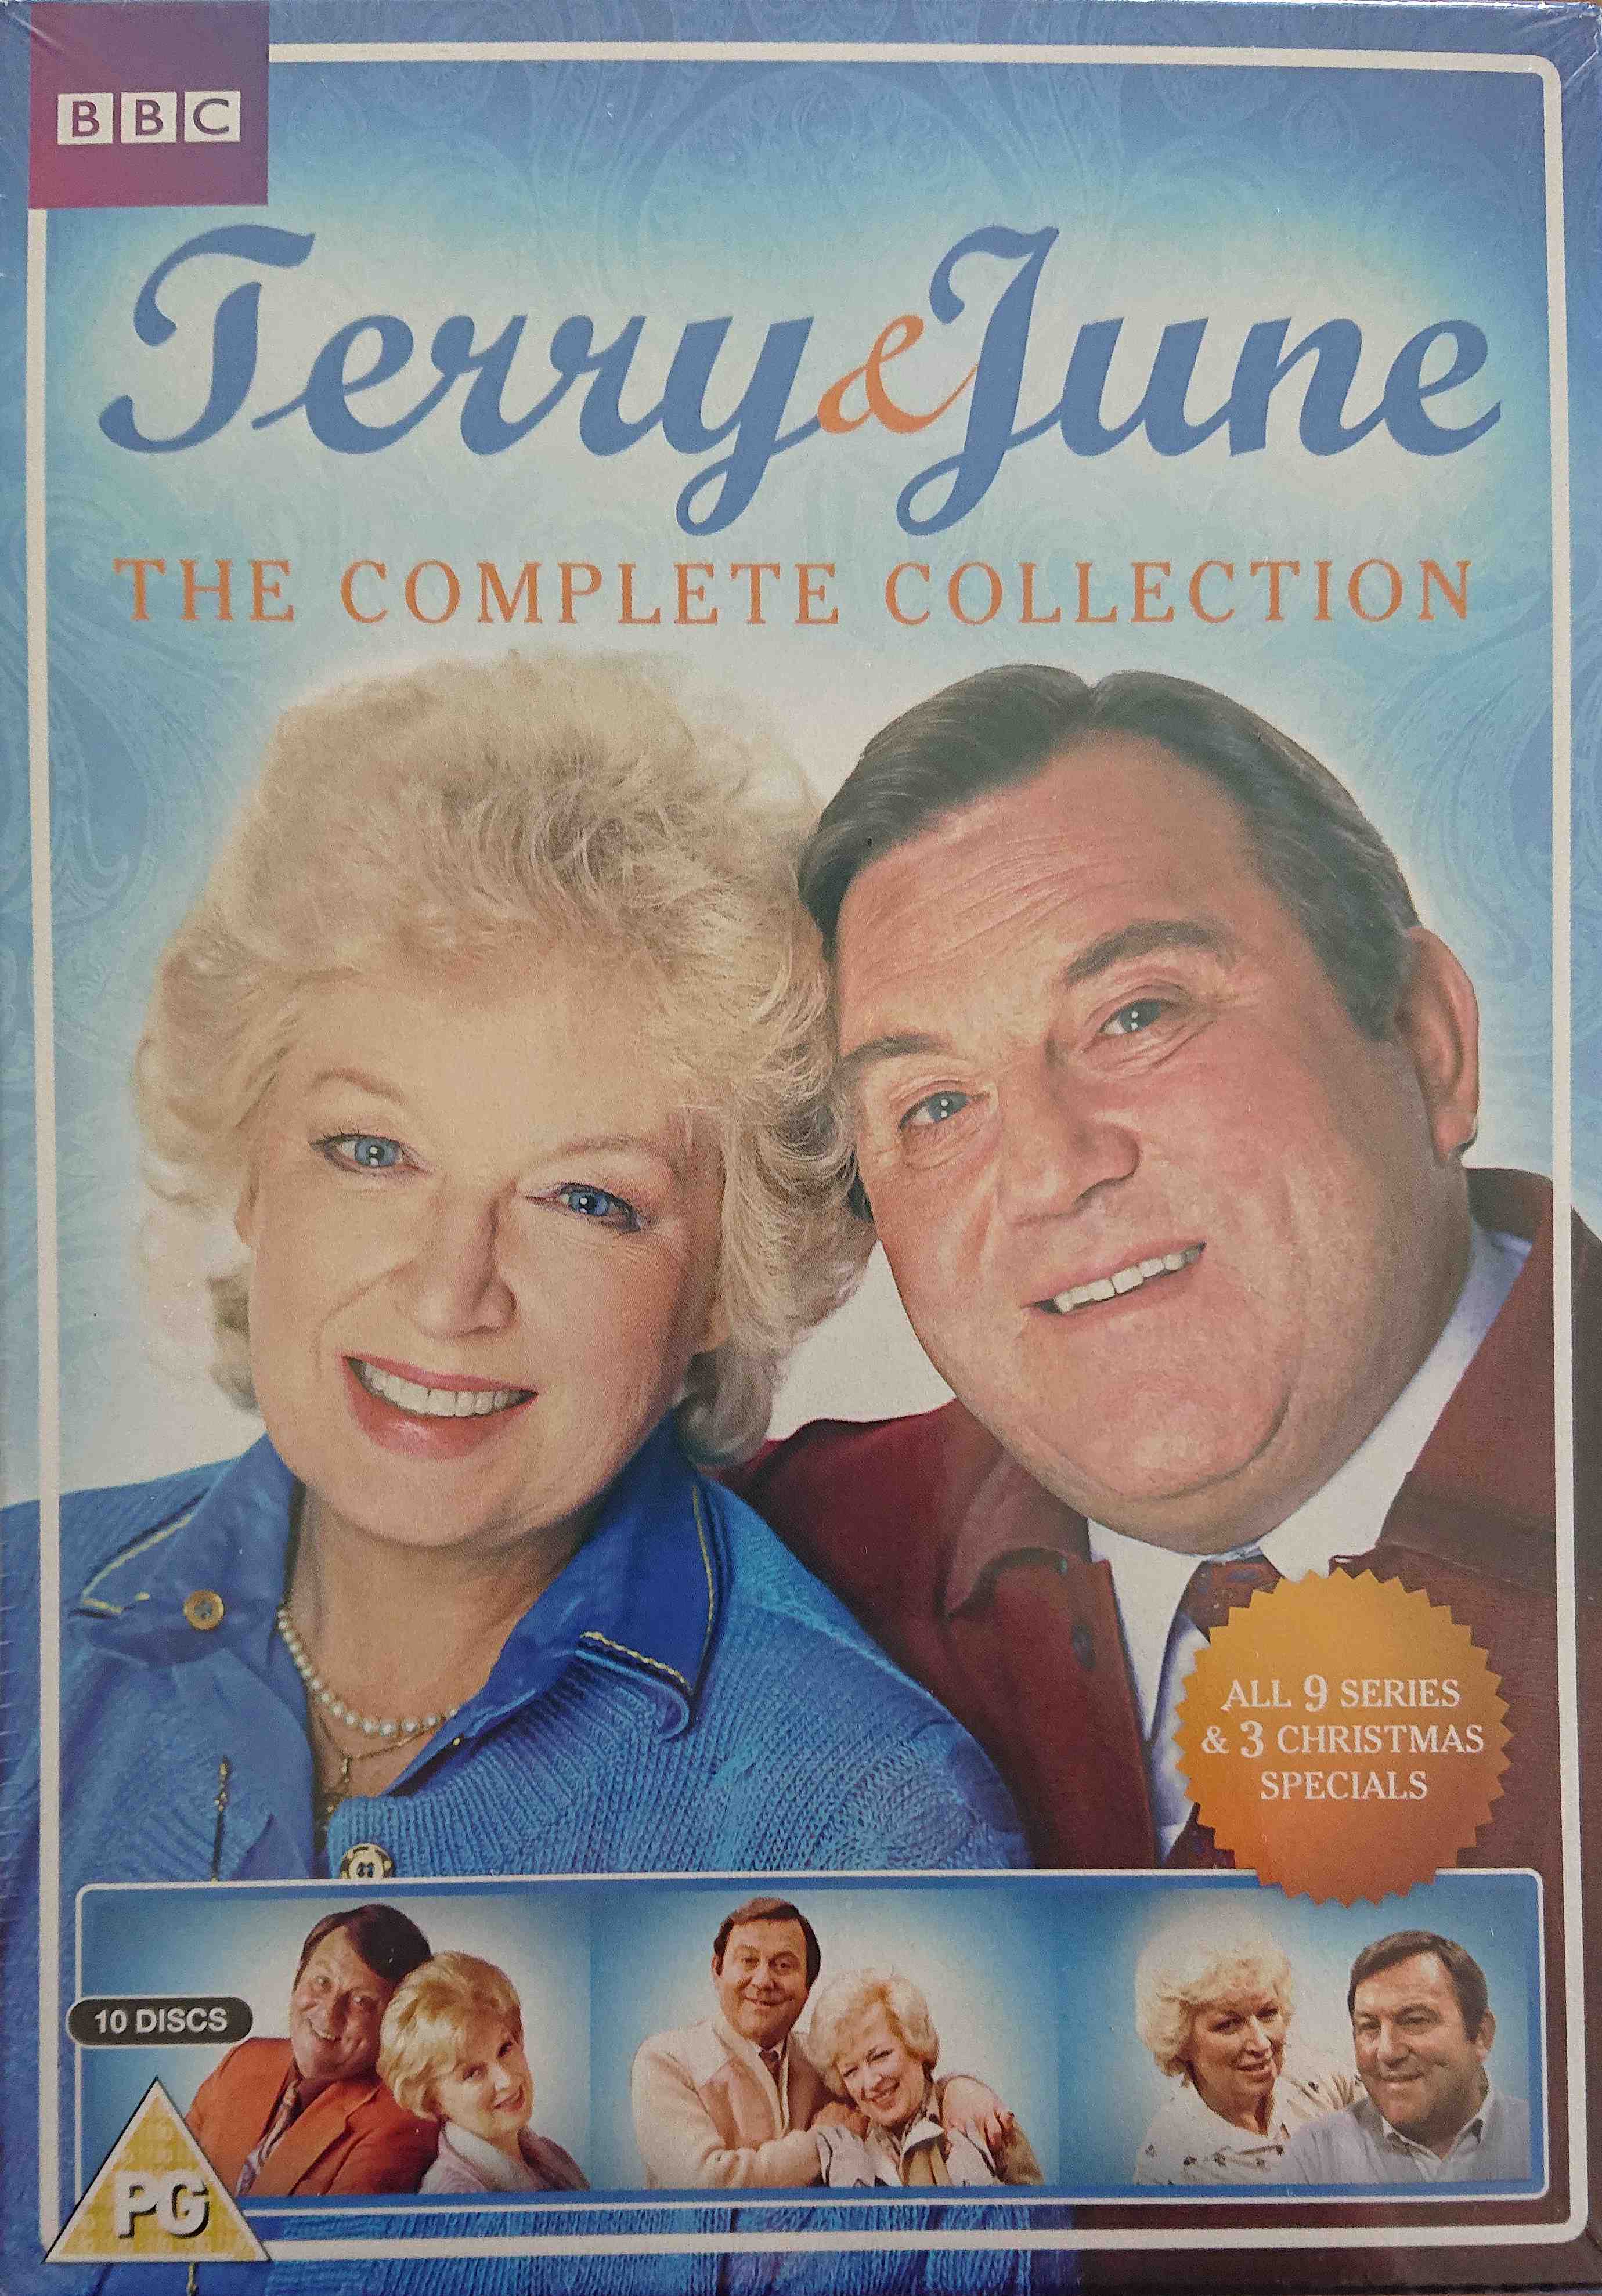 Picture of BBCDVD 4183 Terry & June - The complete collection by artist John Kane / Terry Ravenscroft / John Watkins / Dave Freman / Greg Freeman / Colin Bostock Smith from the BBC records and Tapes library